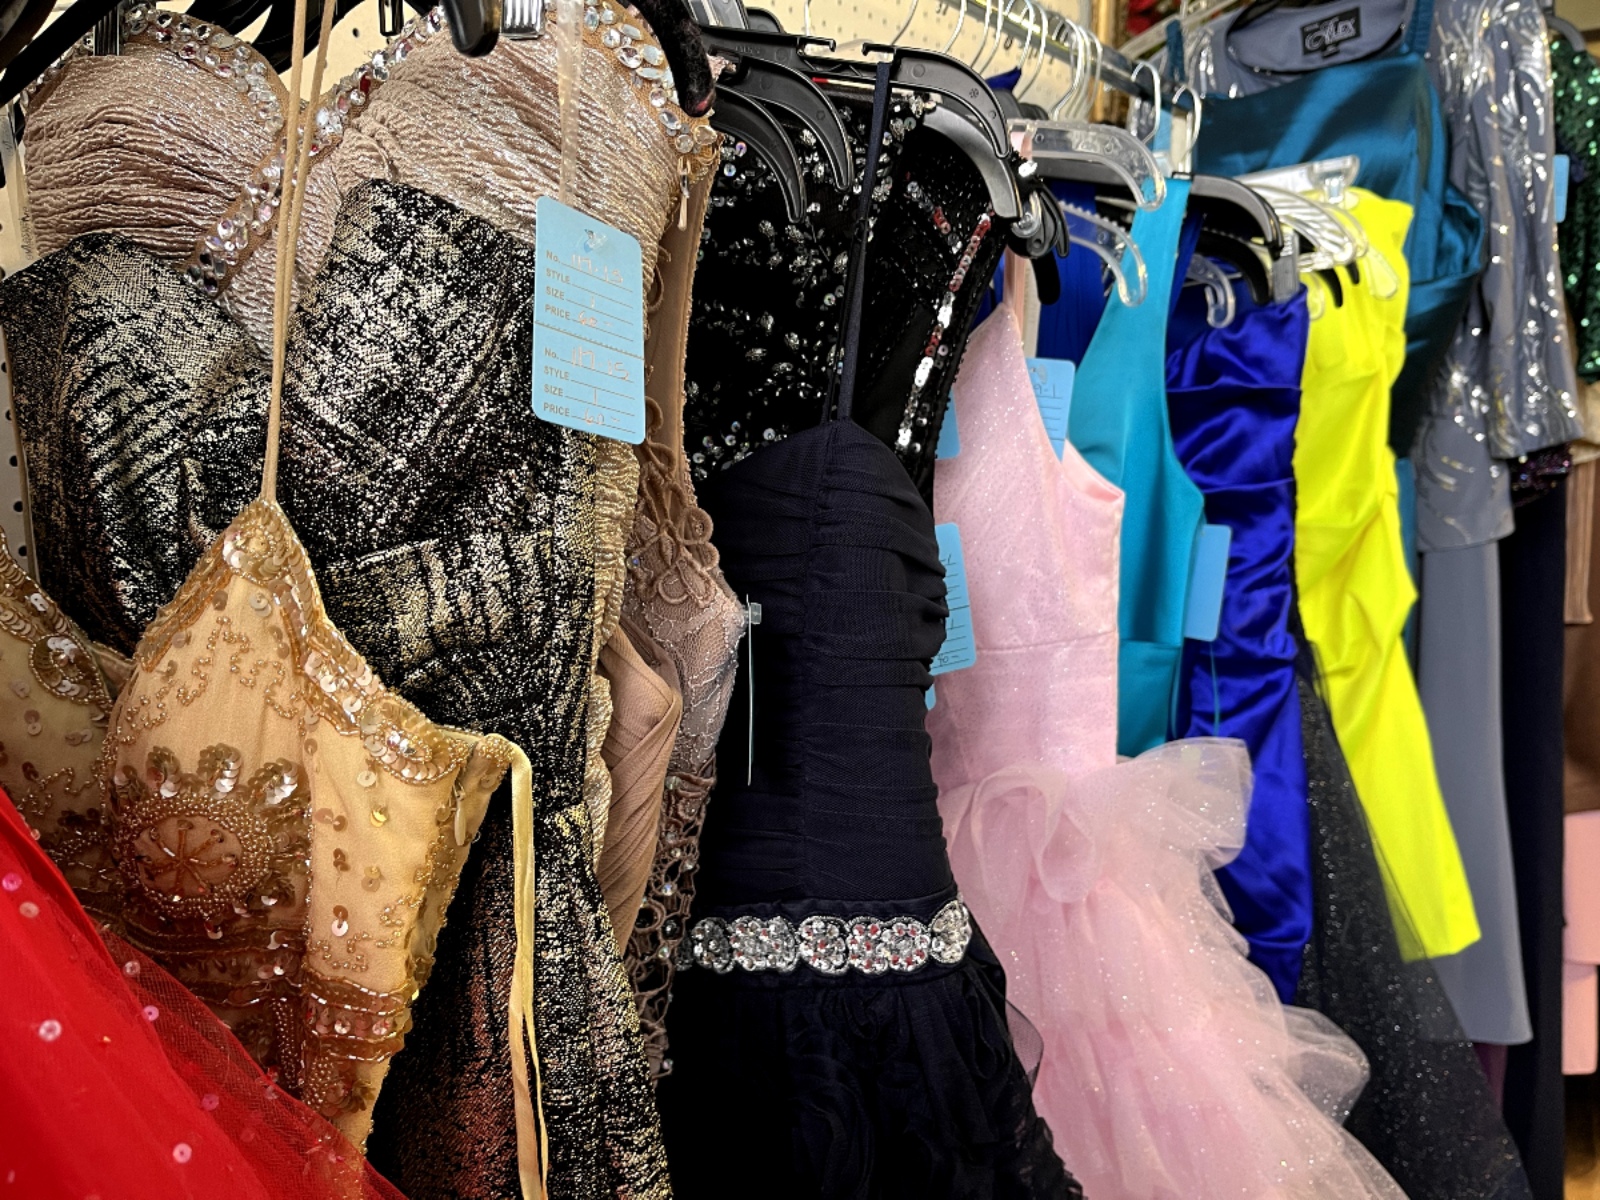 A row of secondhand formal dresses hang on a clothing rack in a store.